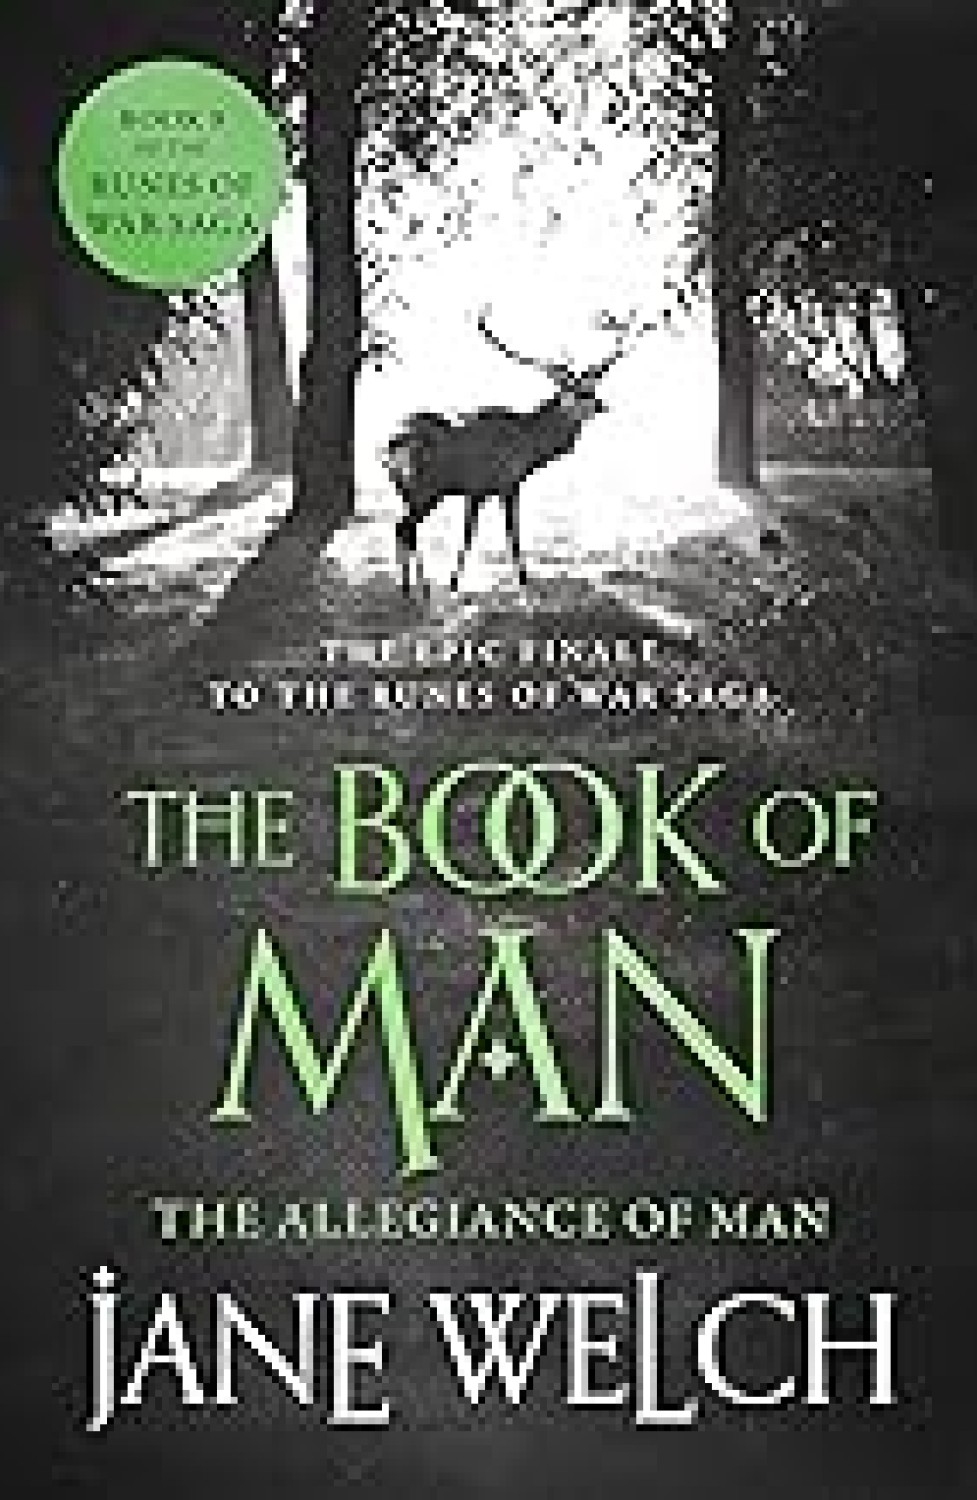 THE BOOK OF MAN : THE ALLEGIANCE OF MAN